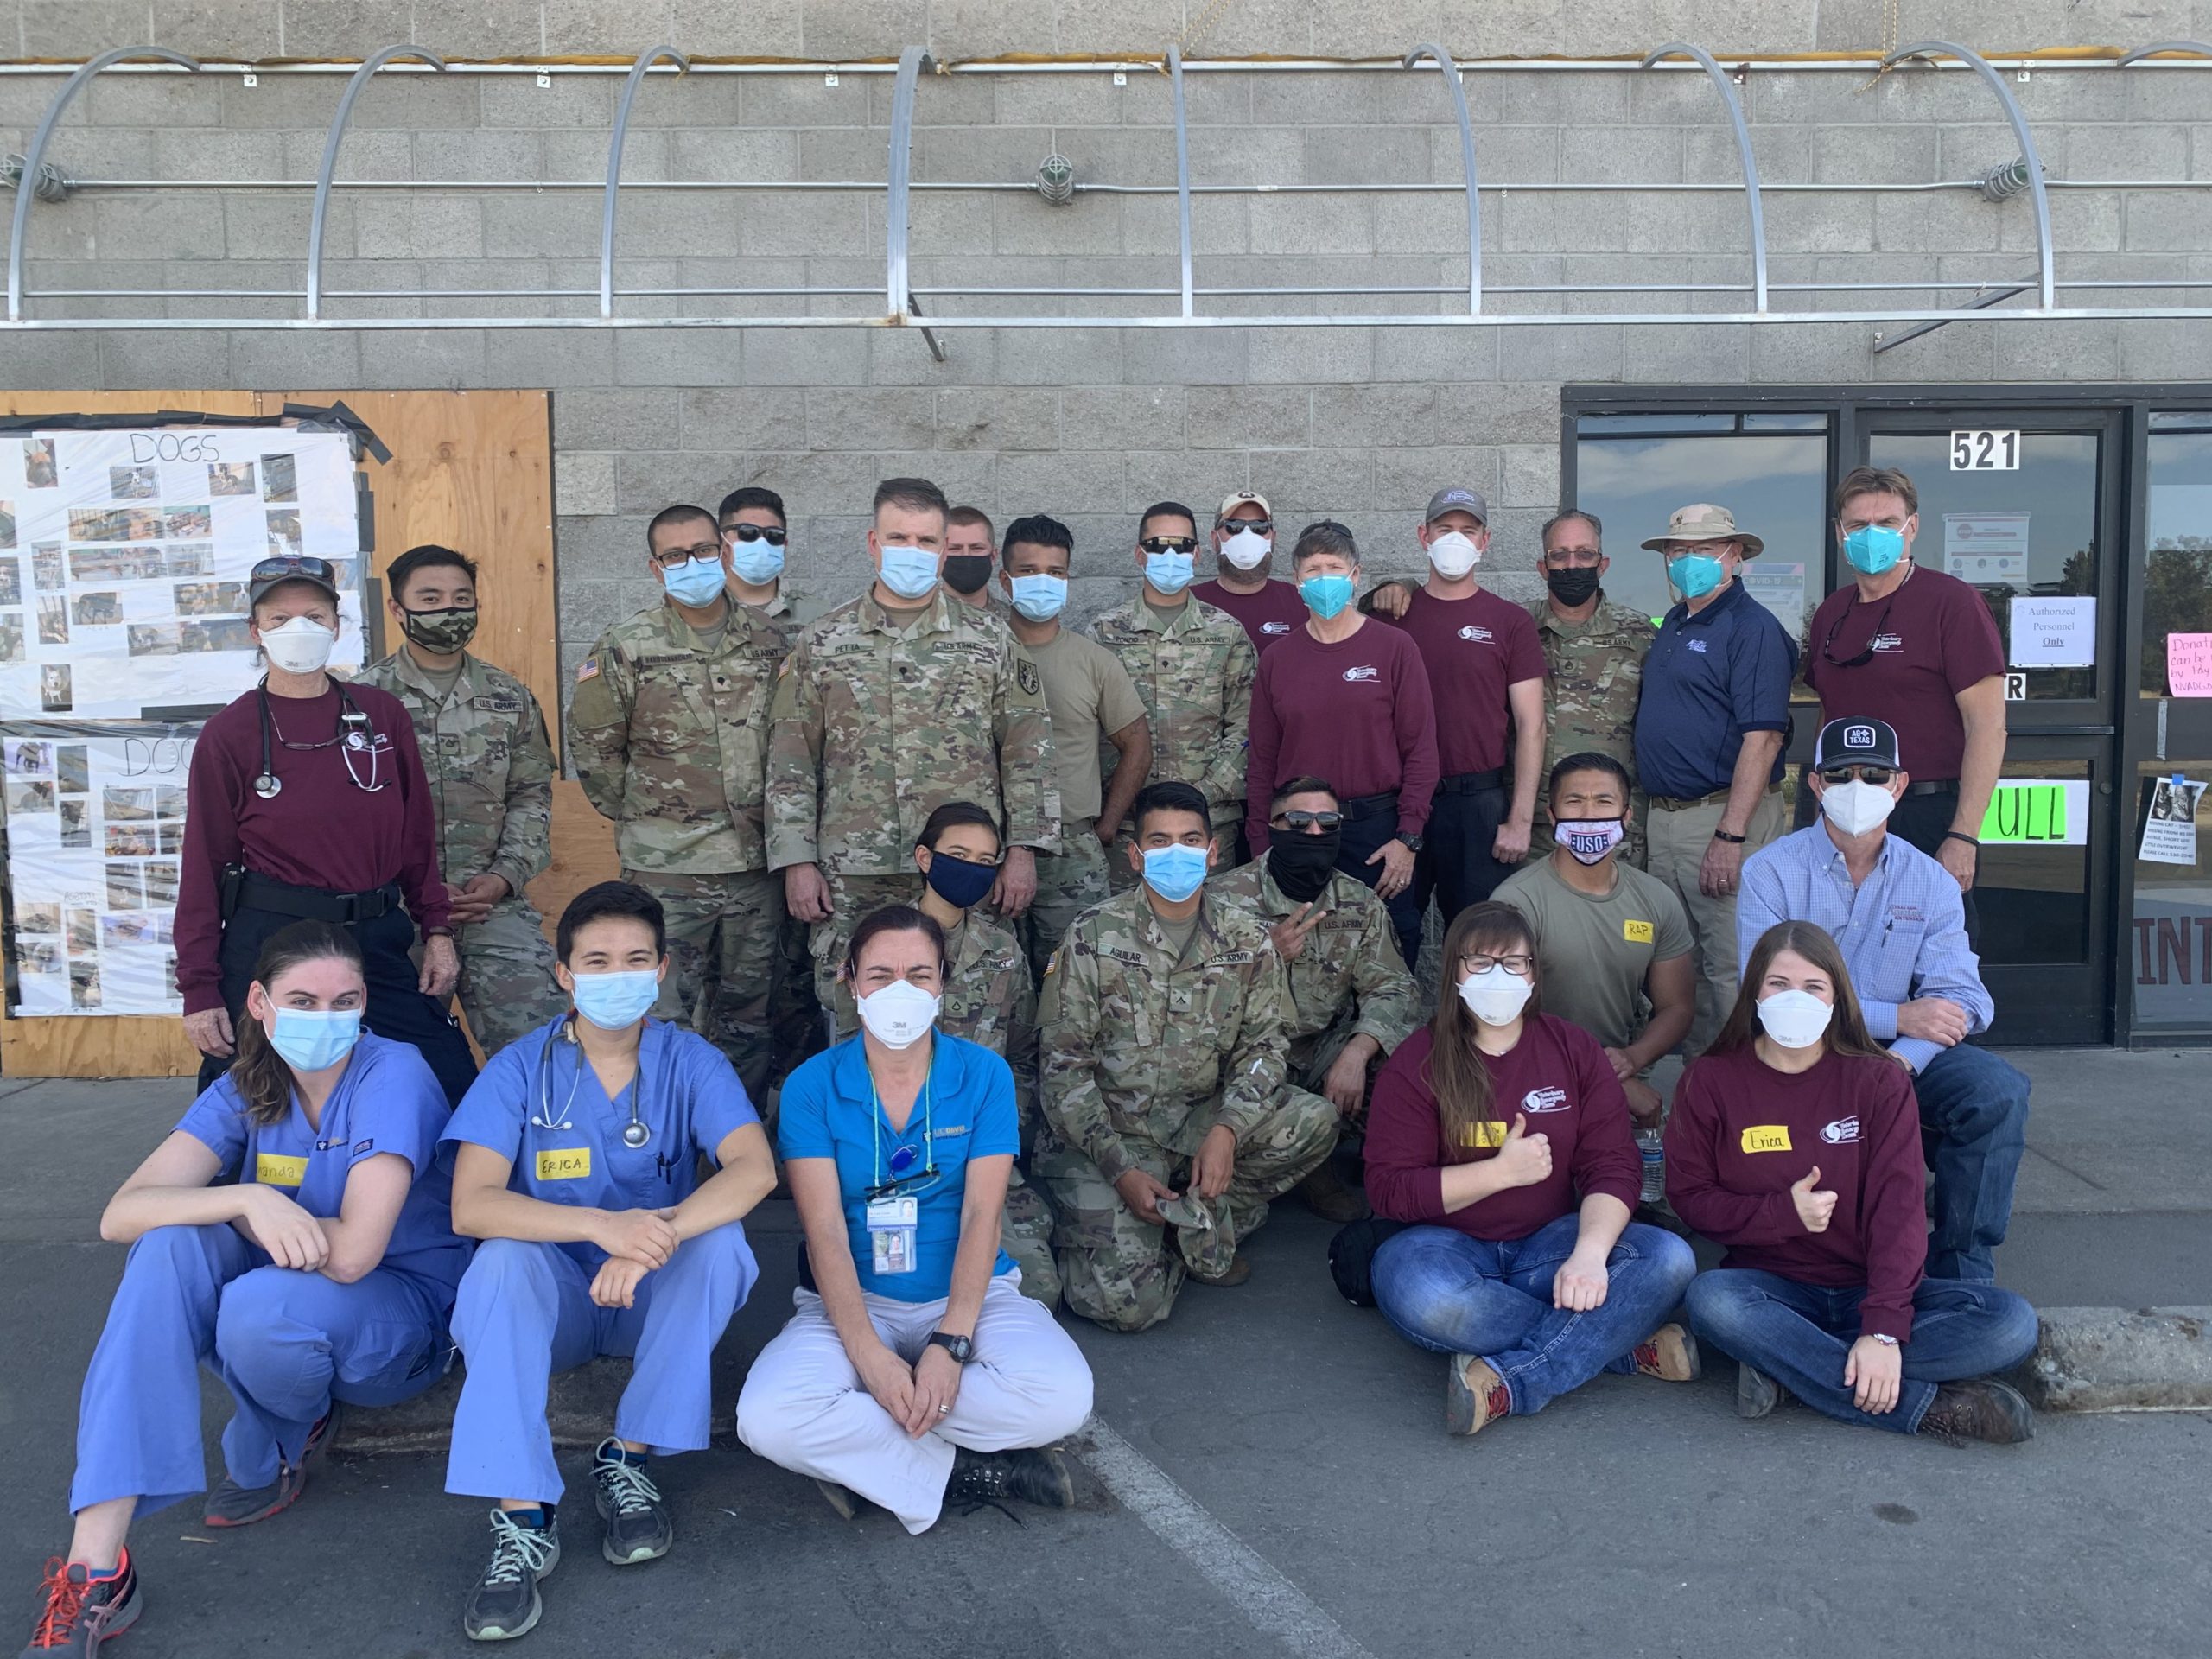 The Texas A&M VET and other emergency responders in California